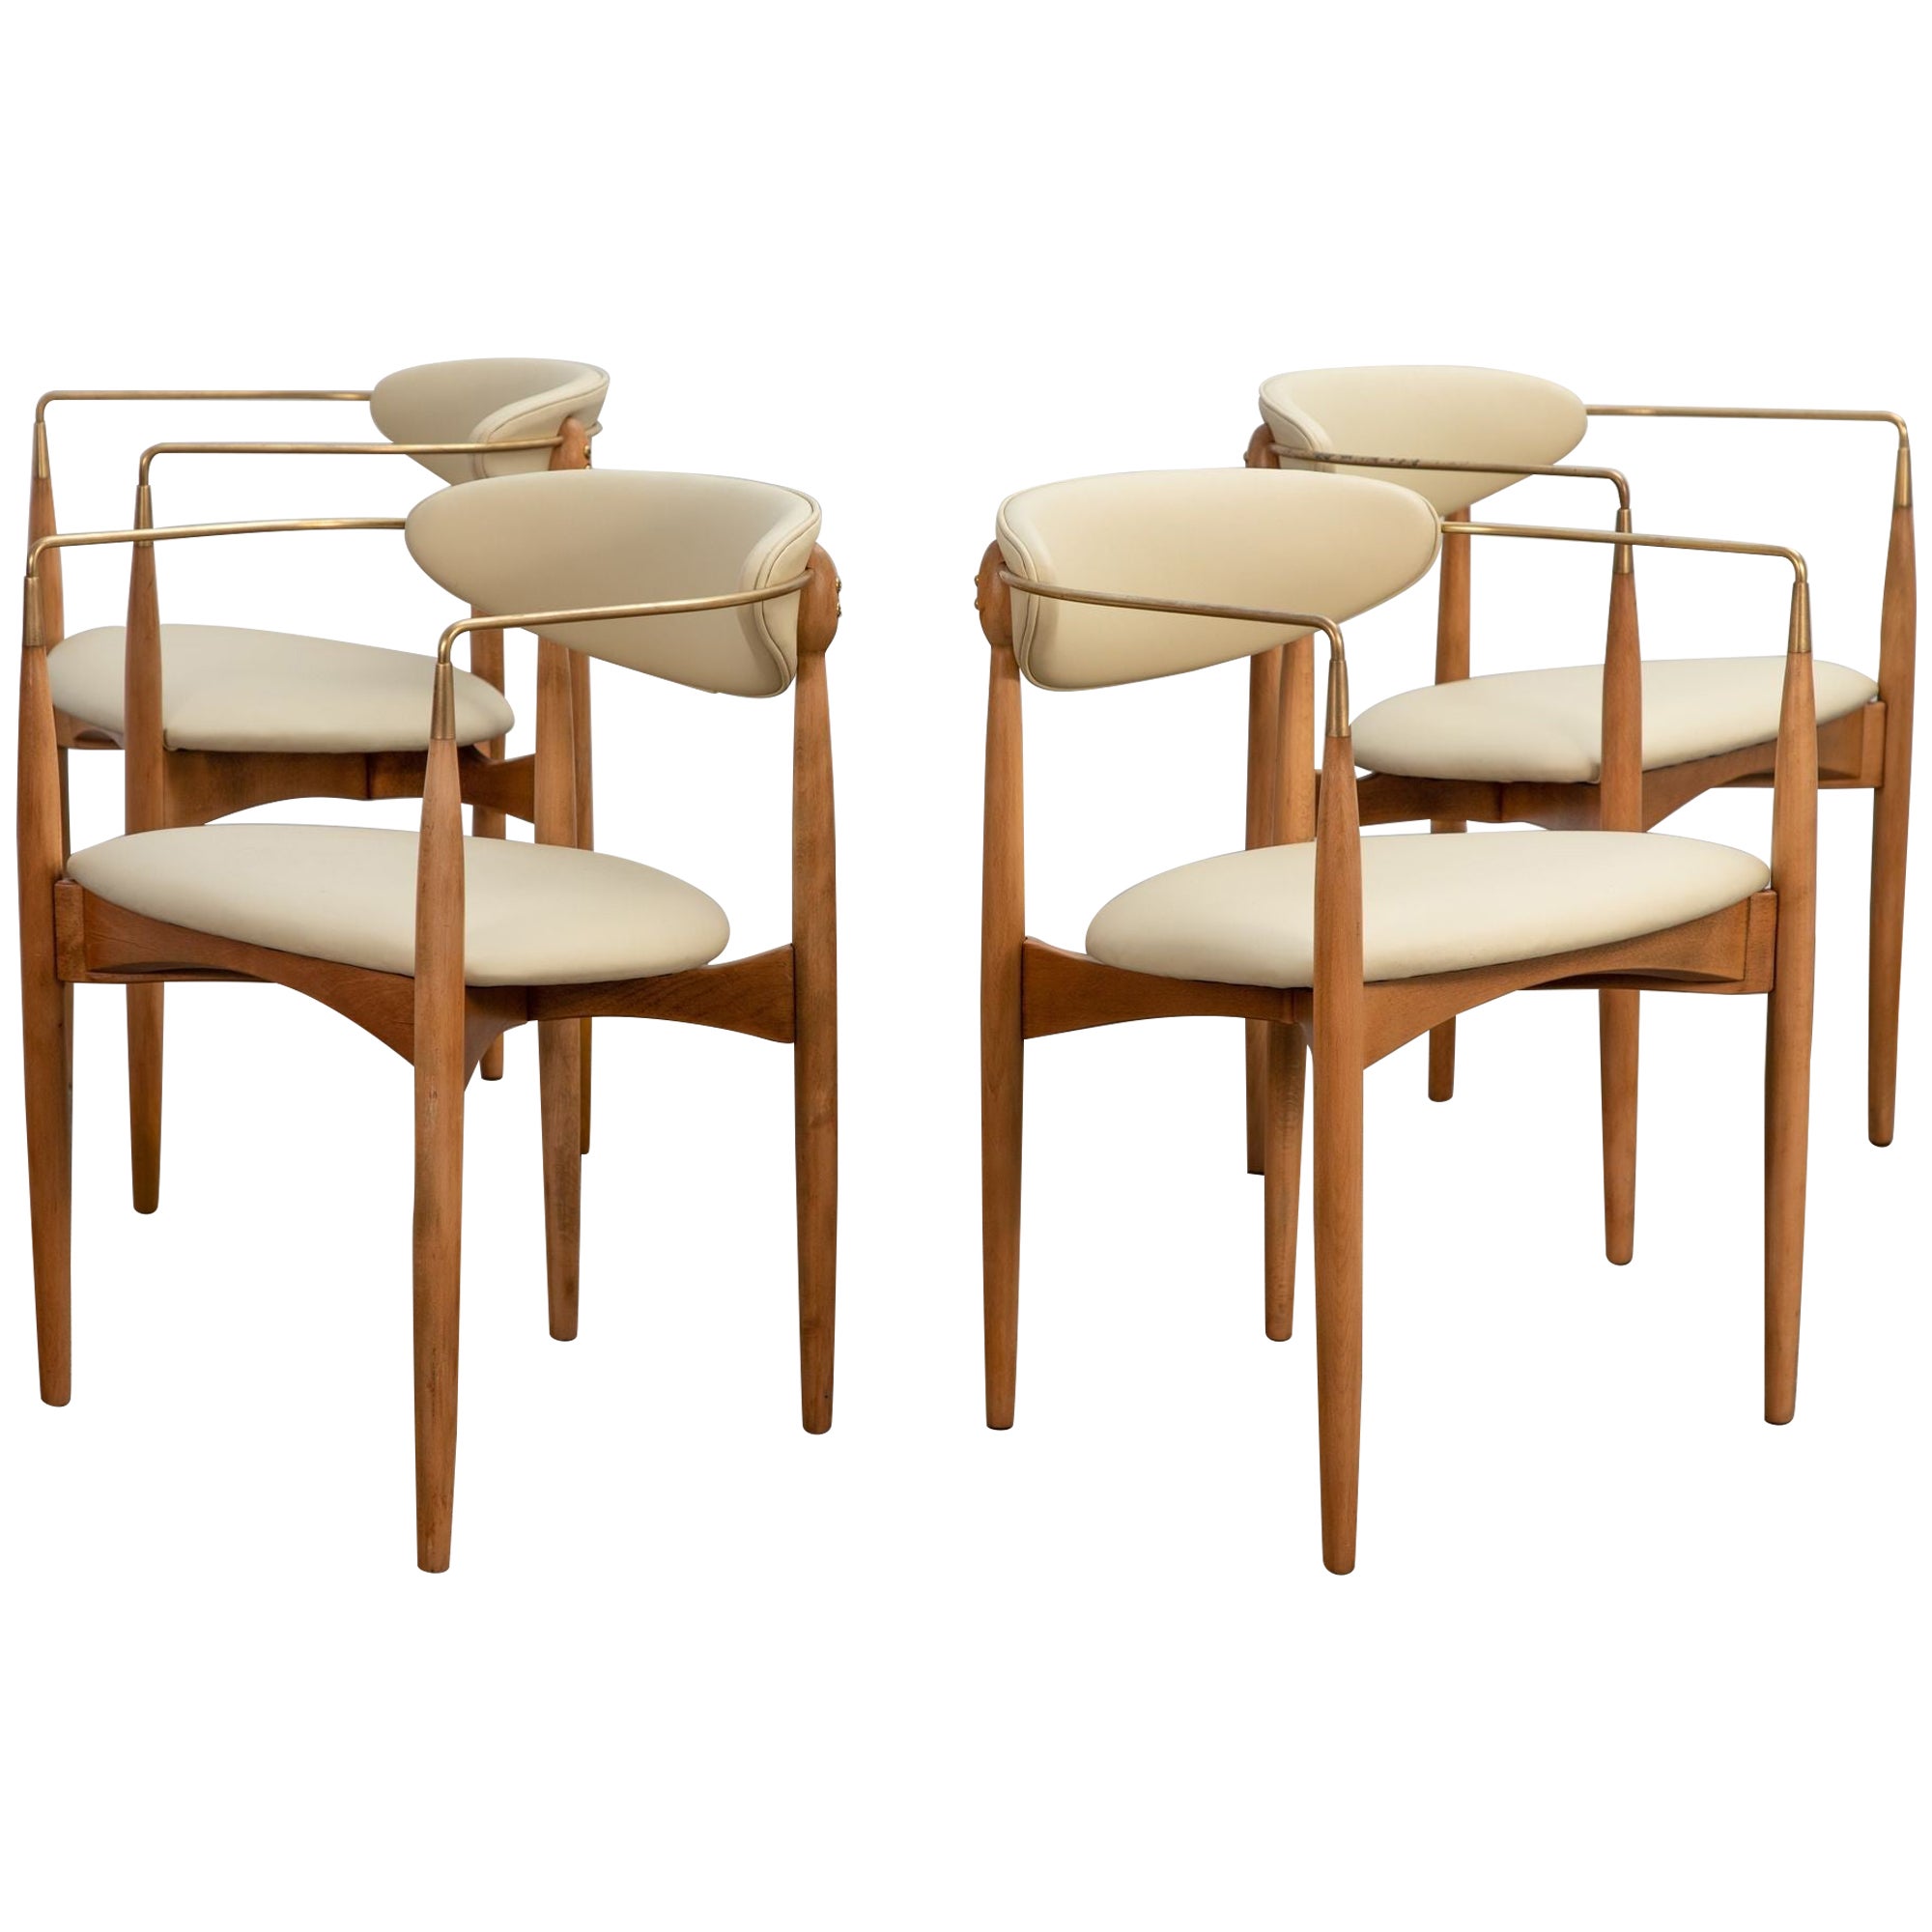 Dan Johnson for Selig Viscount Chairs in Leather